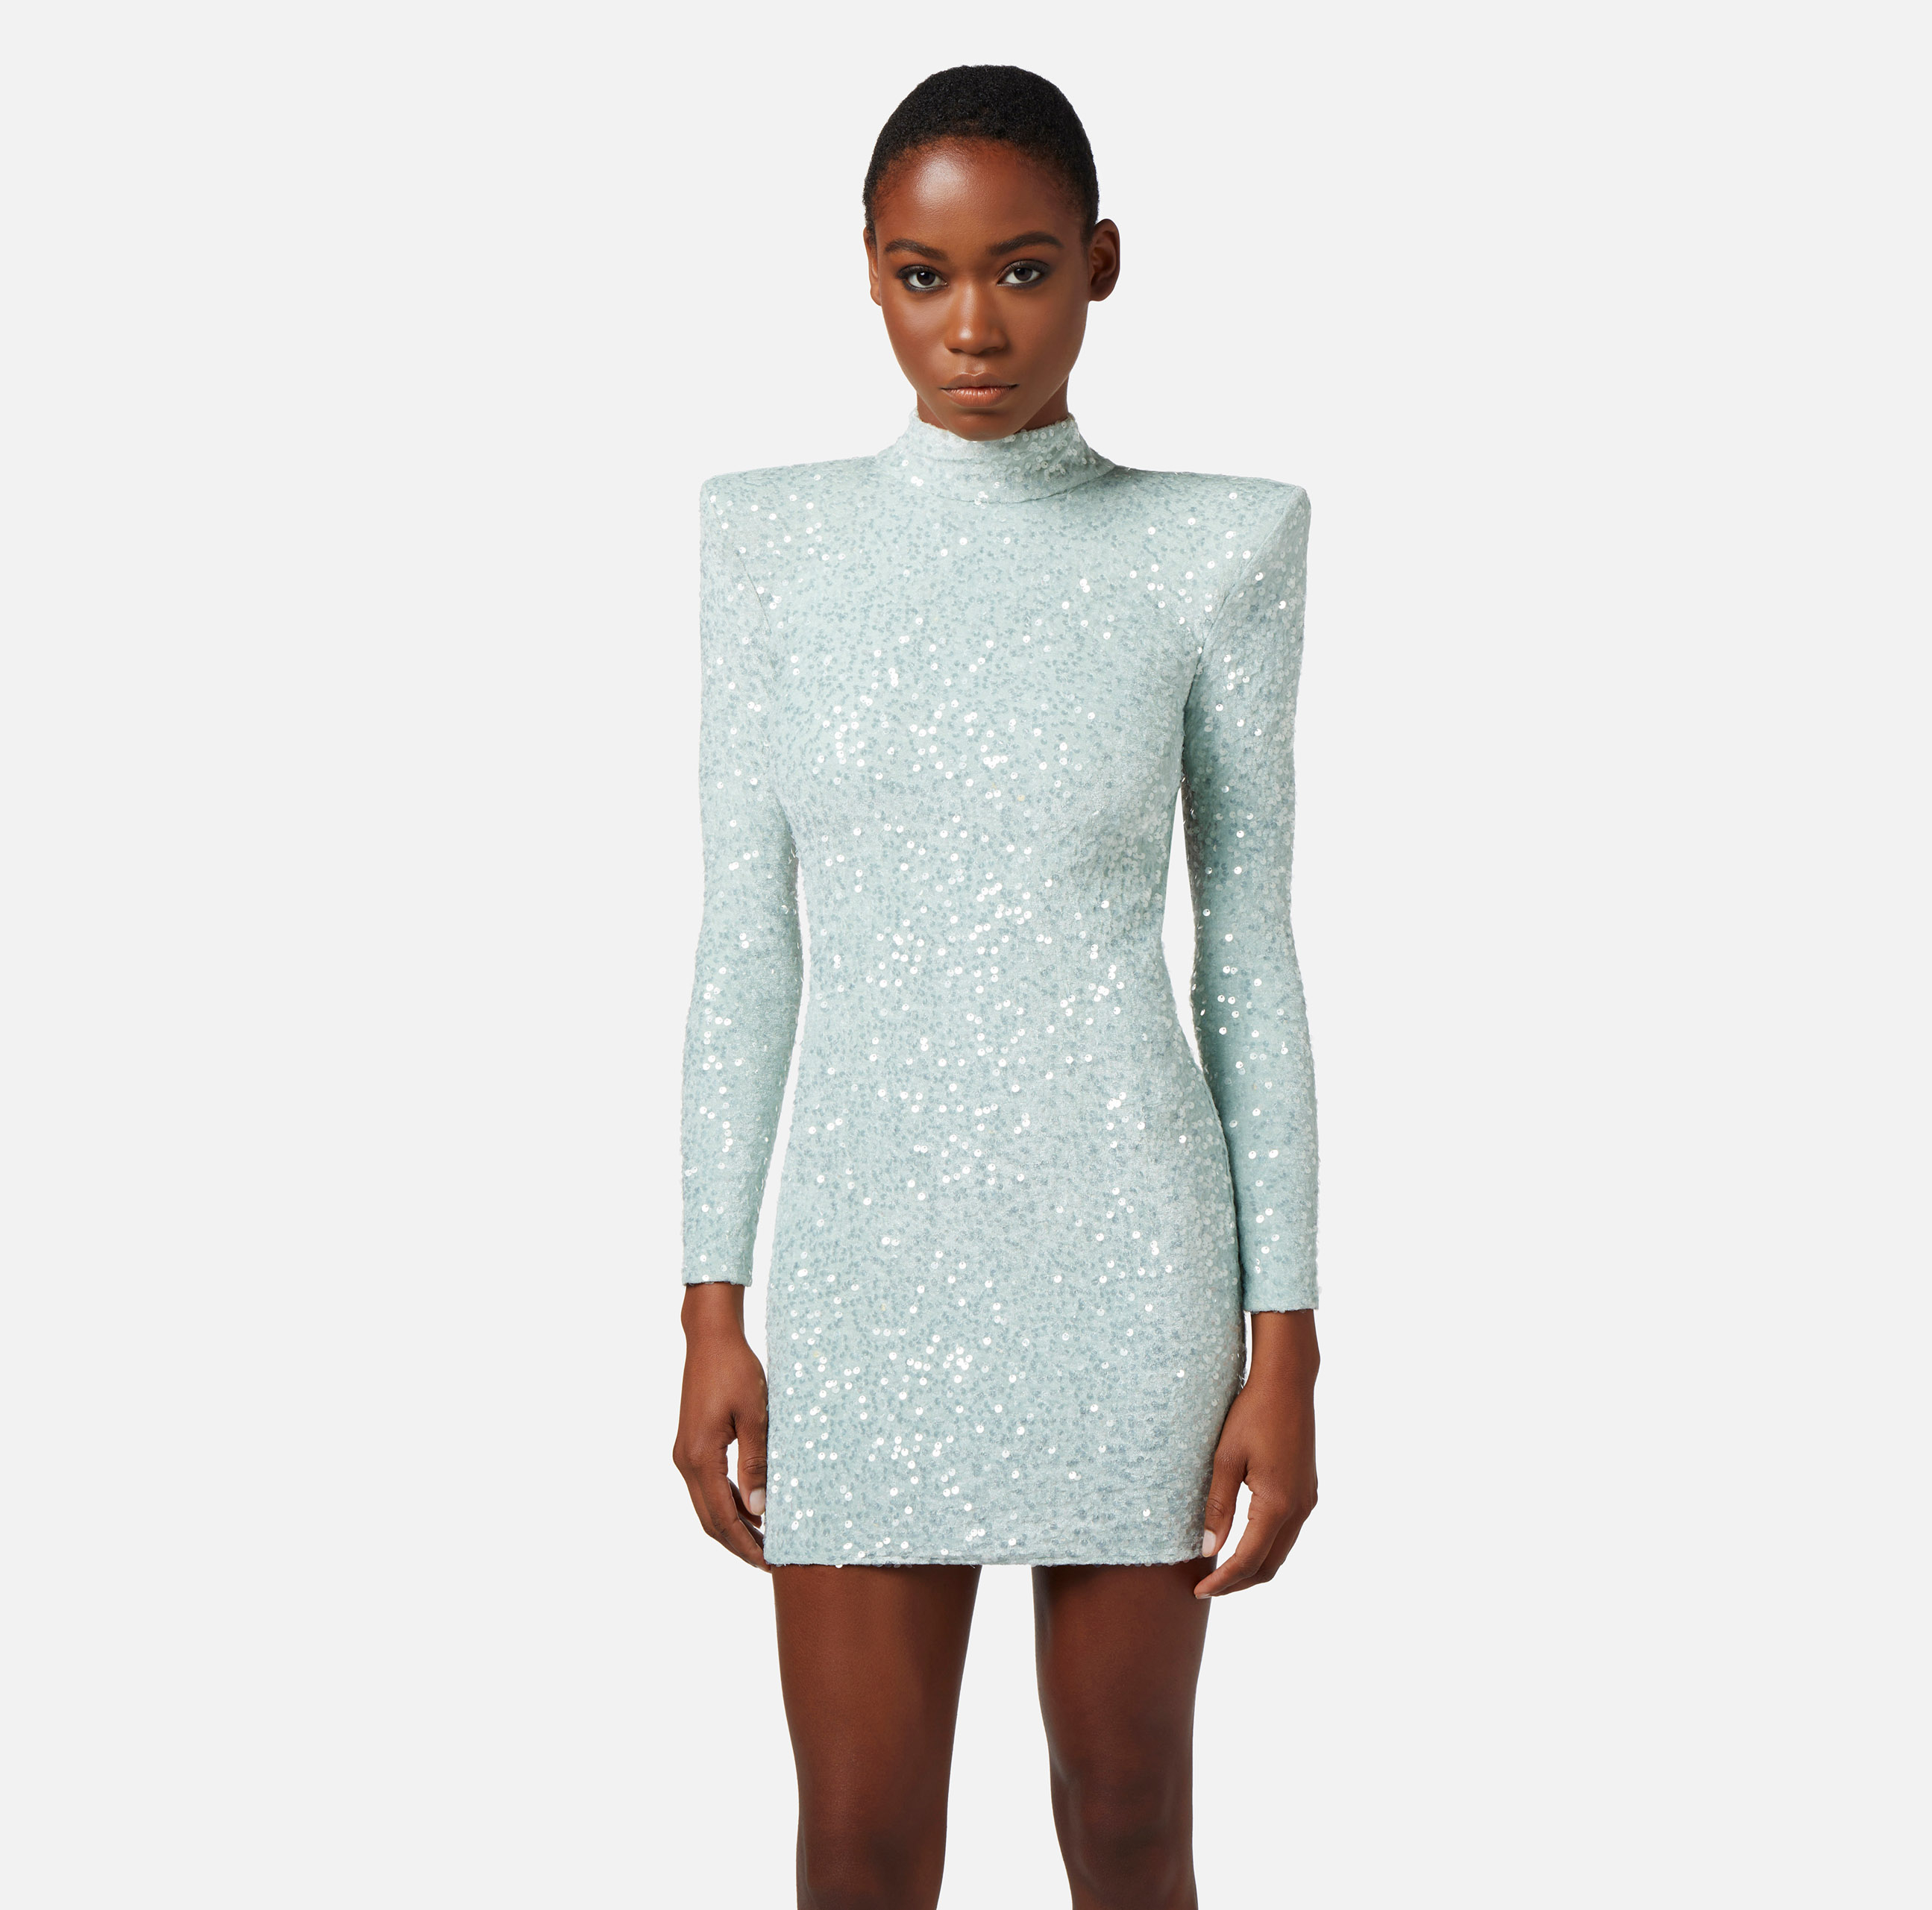 Mini-dress made of sequins with structured shoulders - Elisabetta Franchi